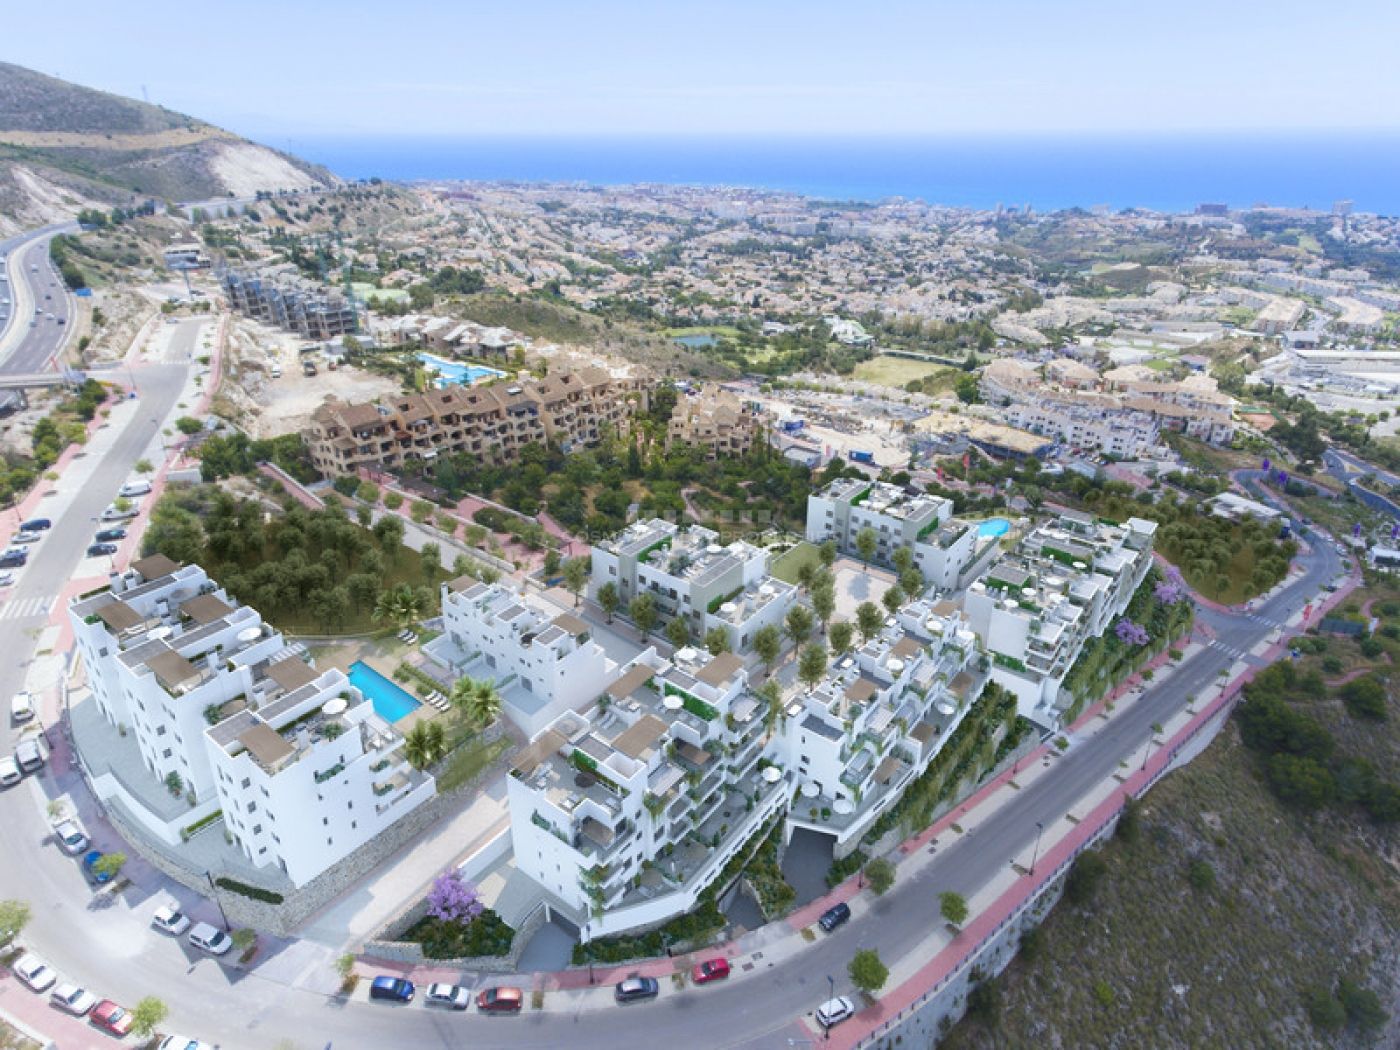 New Horizon is an exclusive development of 2 or 3 bedrooms in Benalmadena close to sea